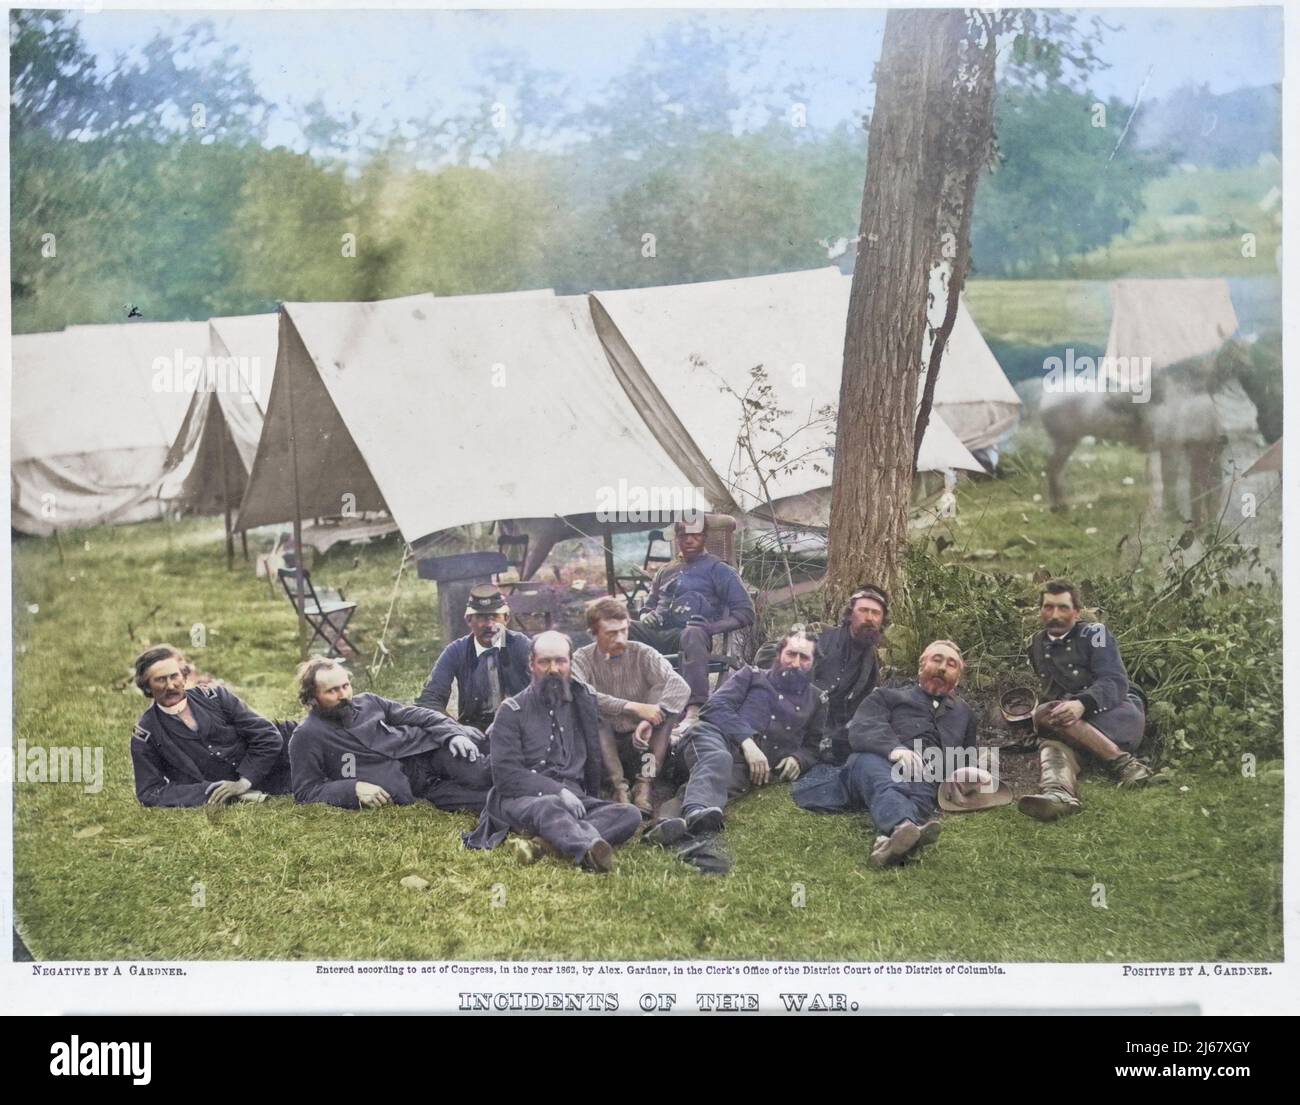 Group at Headquarters of the Army of the Potomac, Antietam, October 1862. Alexander Gardner Stock Photo